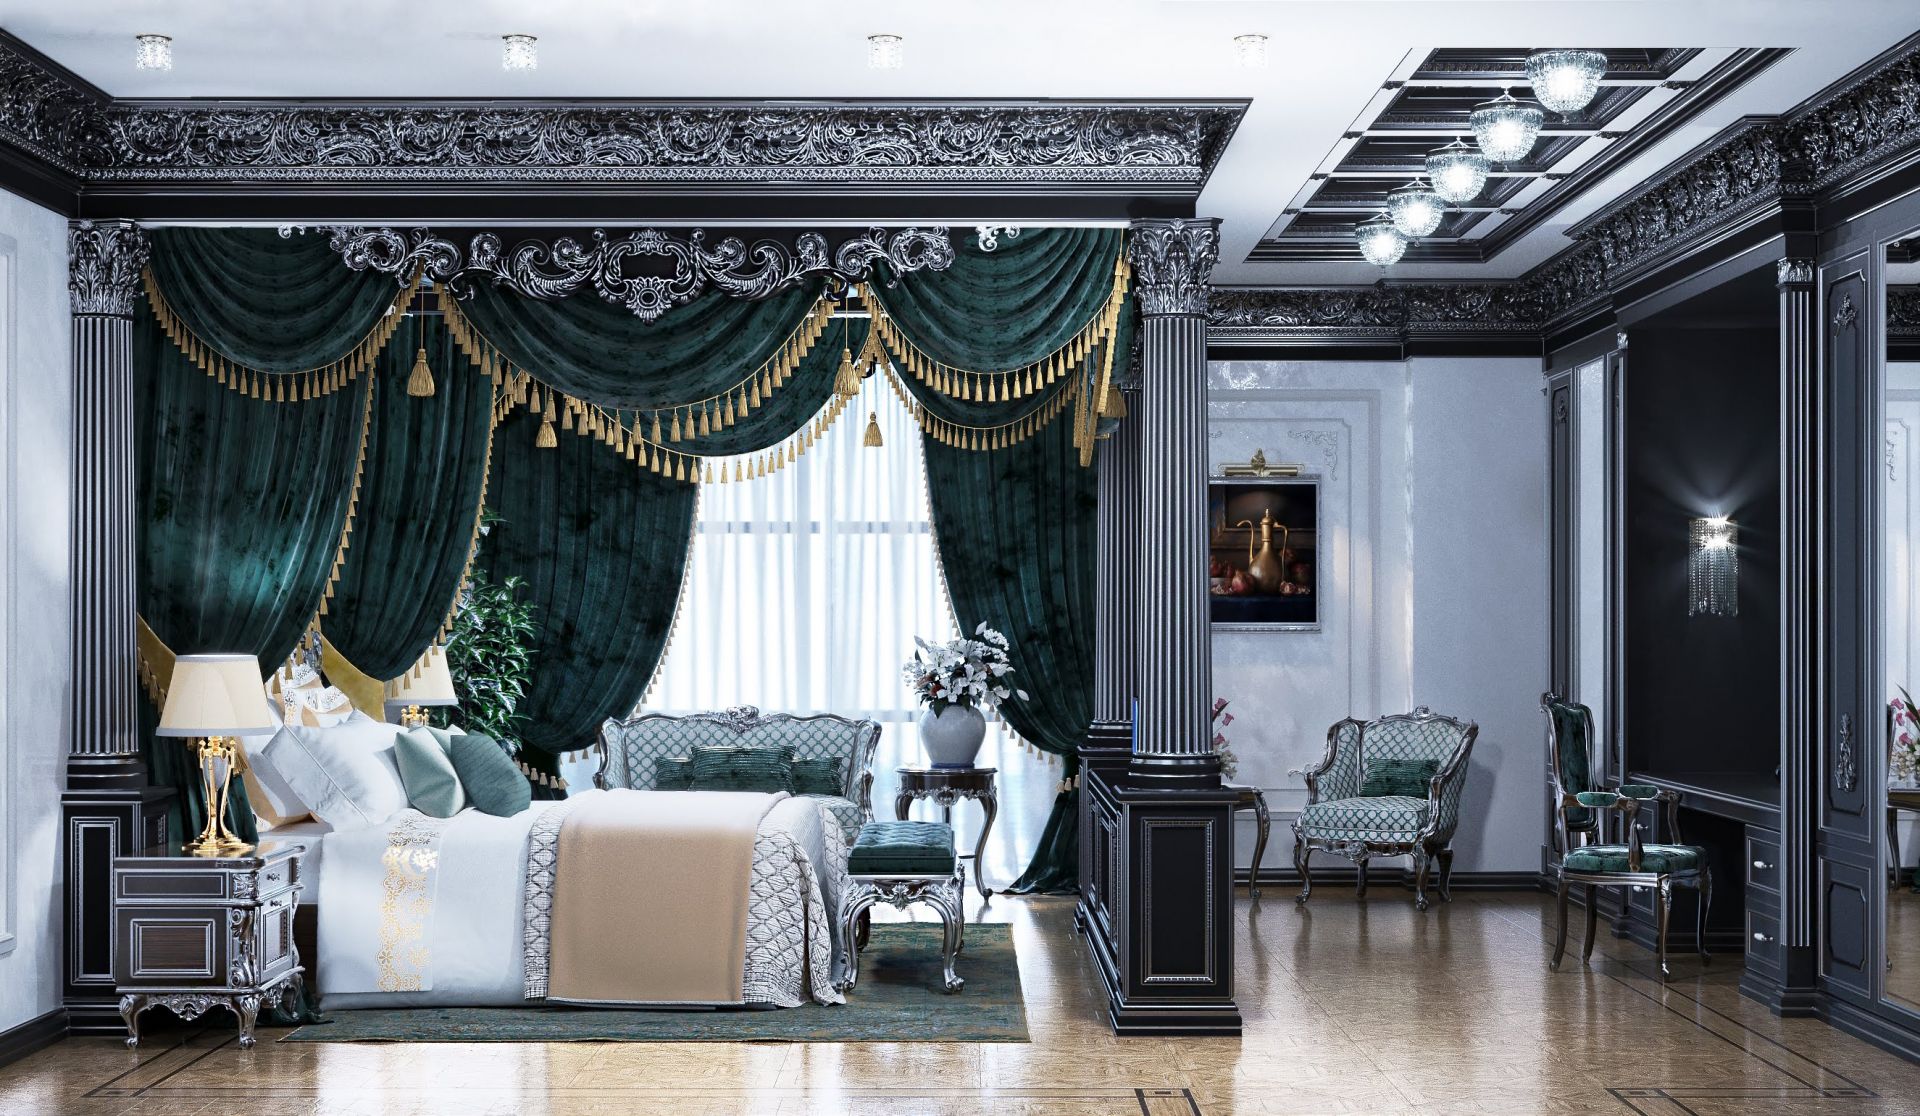 Design, Royal bed in modern environment